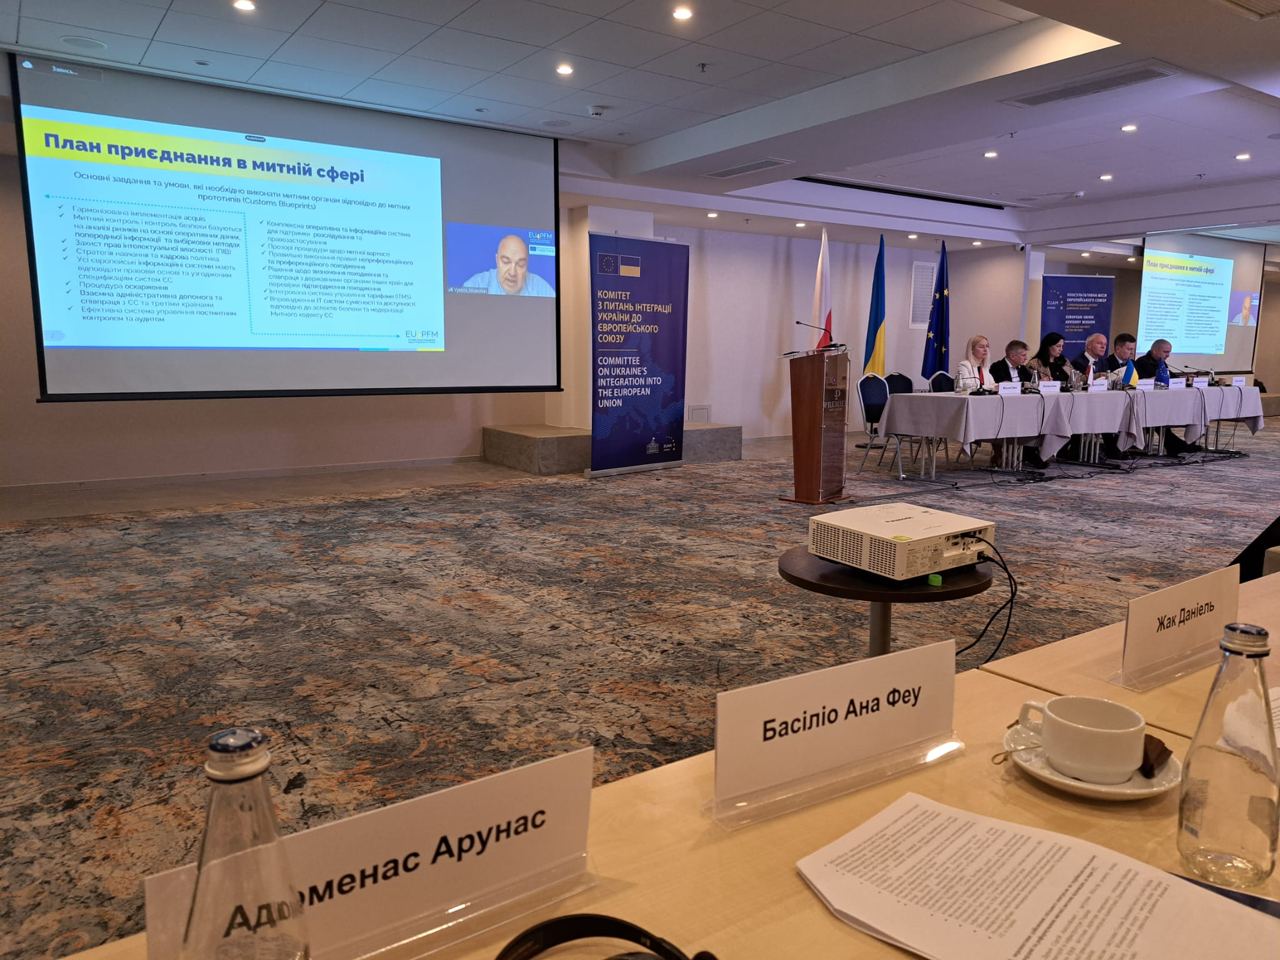 “The development and adoption of the new Customs Code is a strategic task for Ukraine in the customs sphere in the context of accession to the EU”, – Vytenis Alisauskas